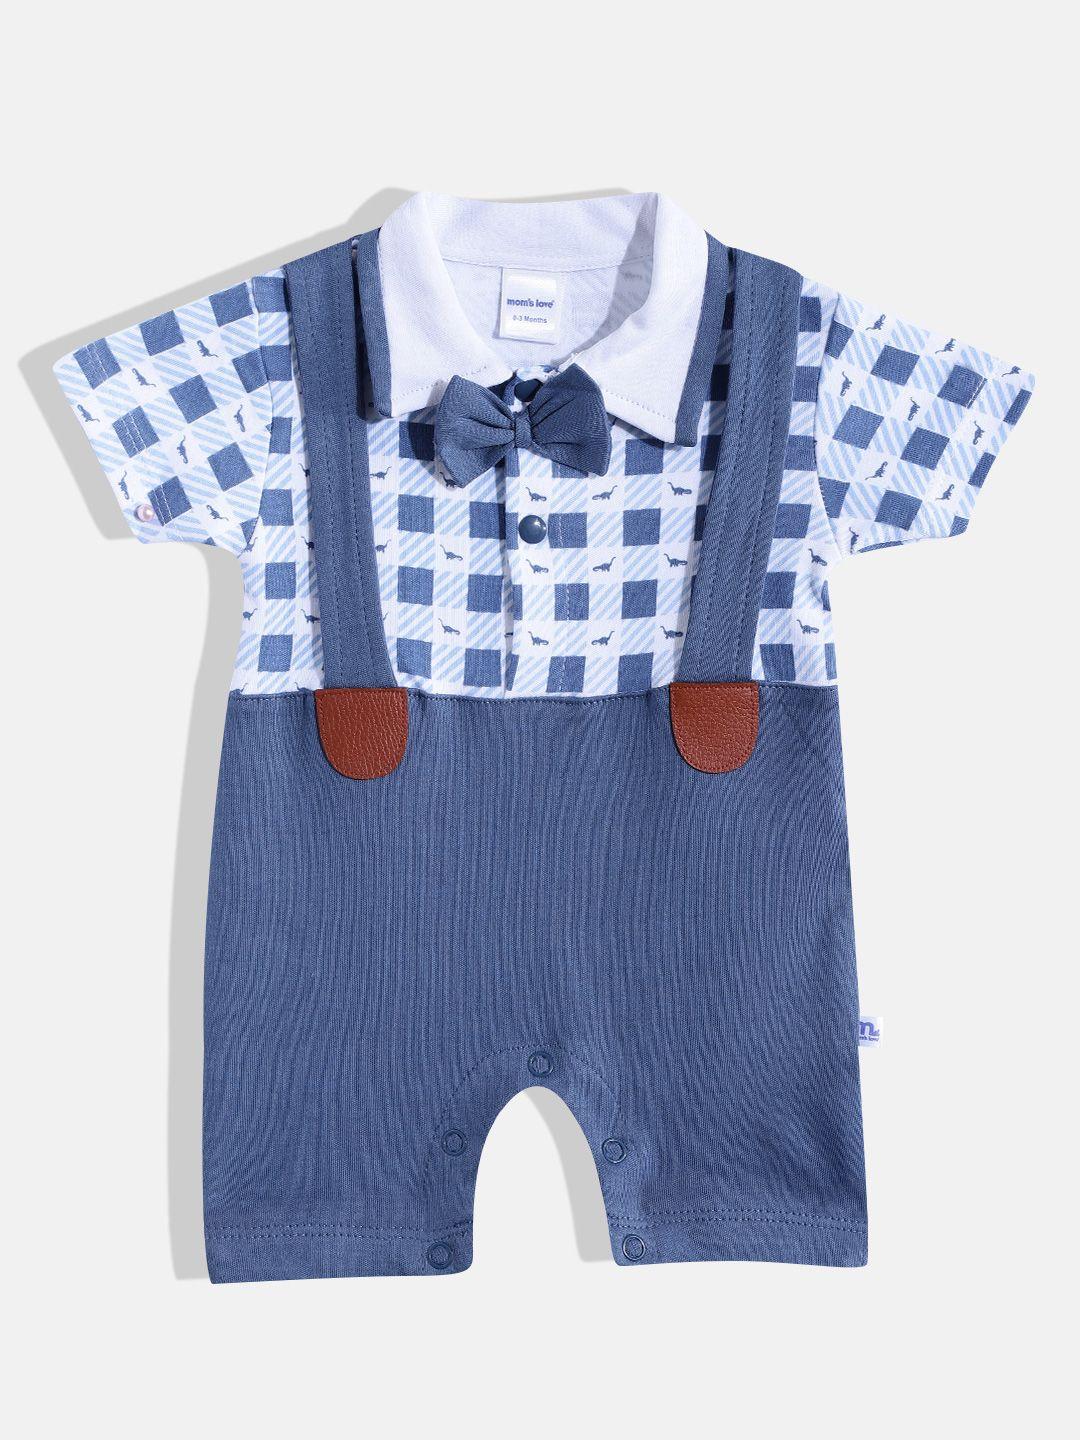 moms-love-infant-boys-blue-&-white-checked-pure-cotton-rompers